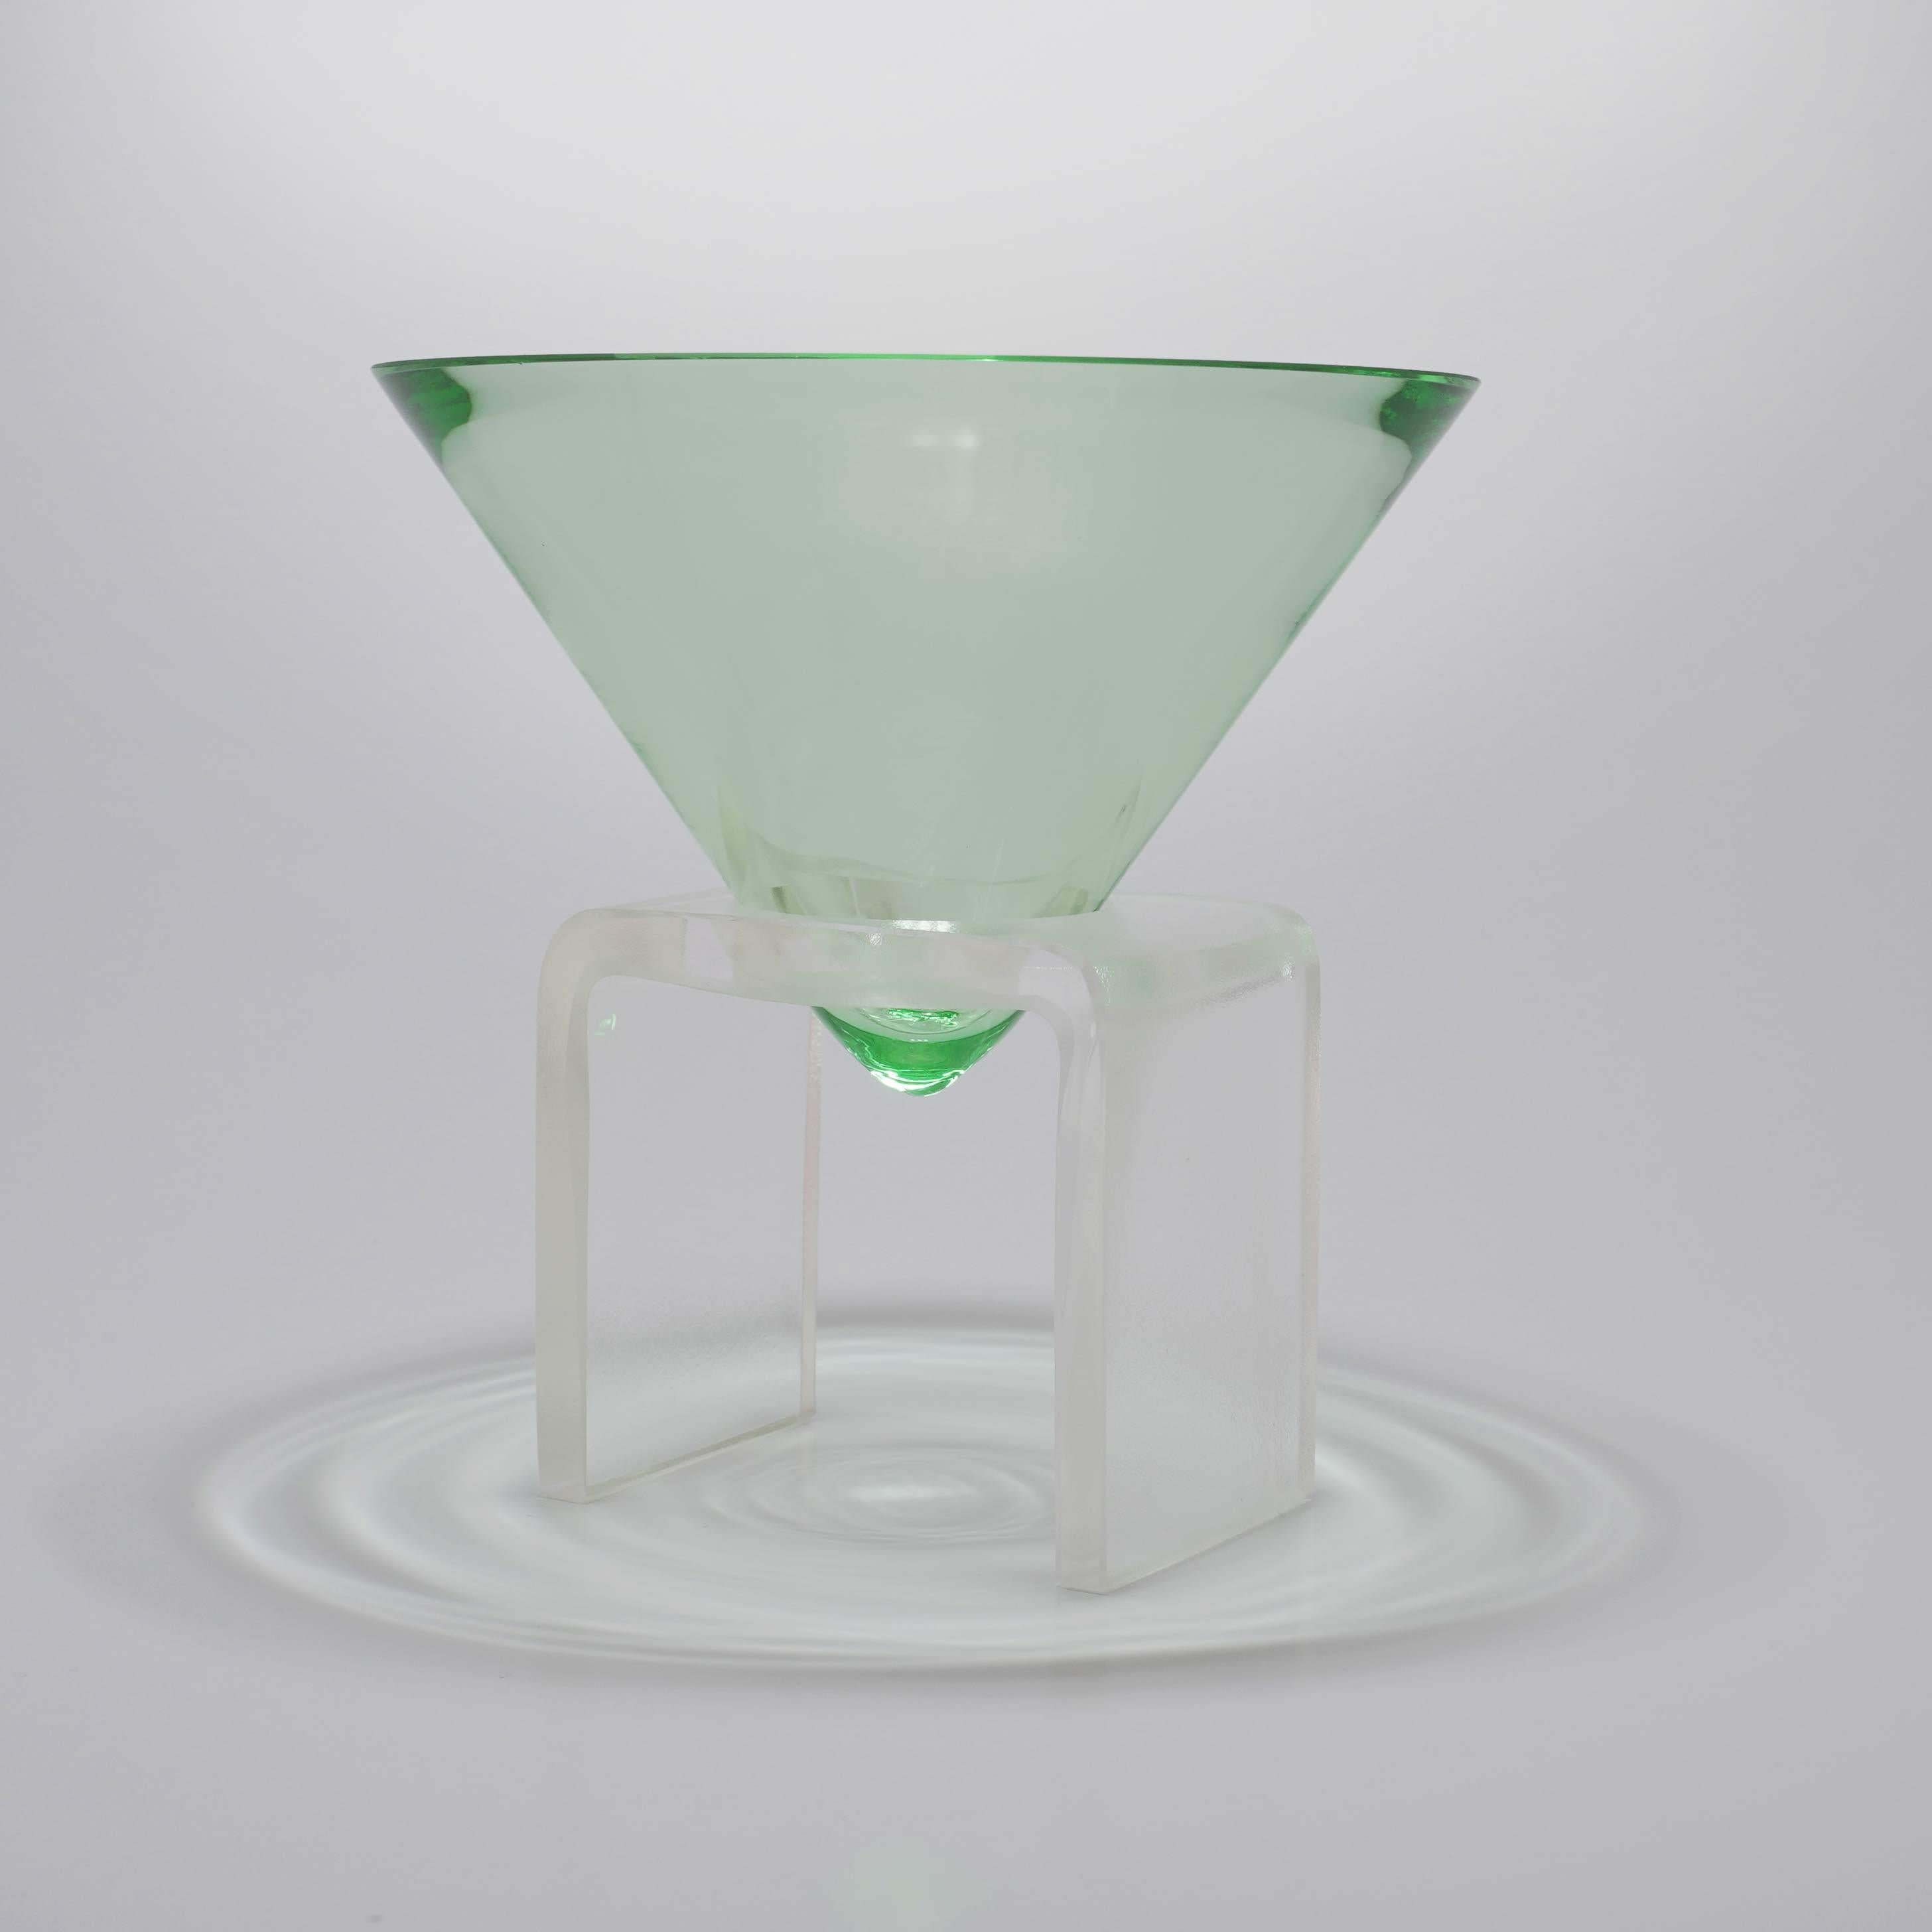 Martini glass by Kickie Chudikova
Limited Edition of 5 pieces each - 3 of each in stock
Handmade in Czech Republic, won’t be producing another edition.
Each piece is slightly different.
Dimensions: D 10.9 x H 11.5 cm
Materials: Glass

Kickie